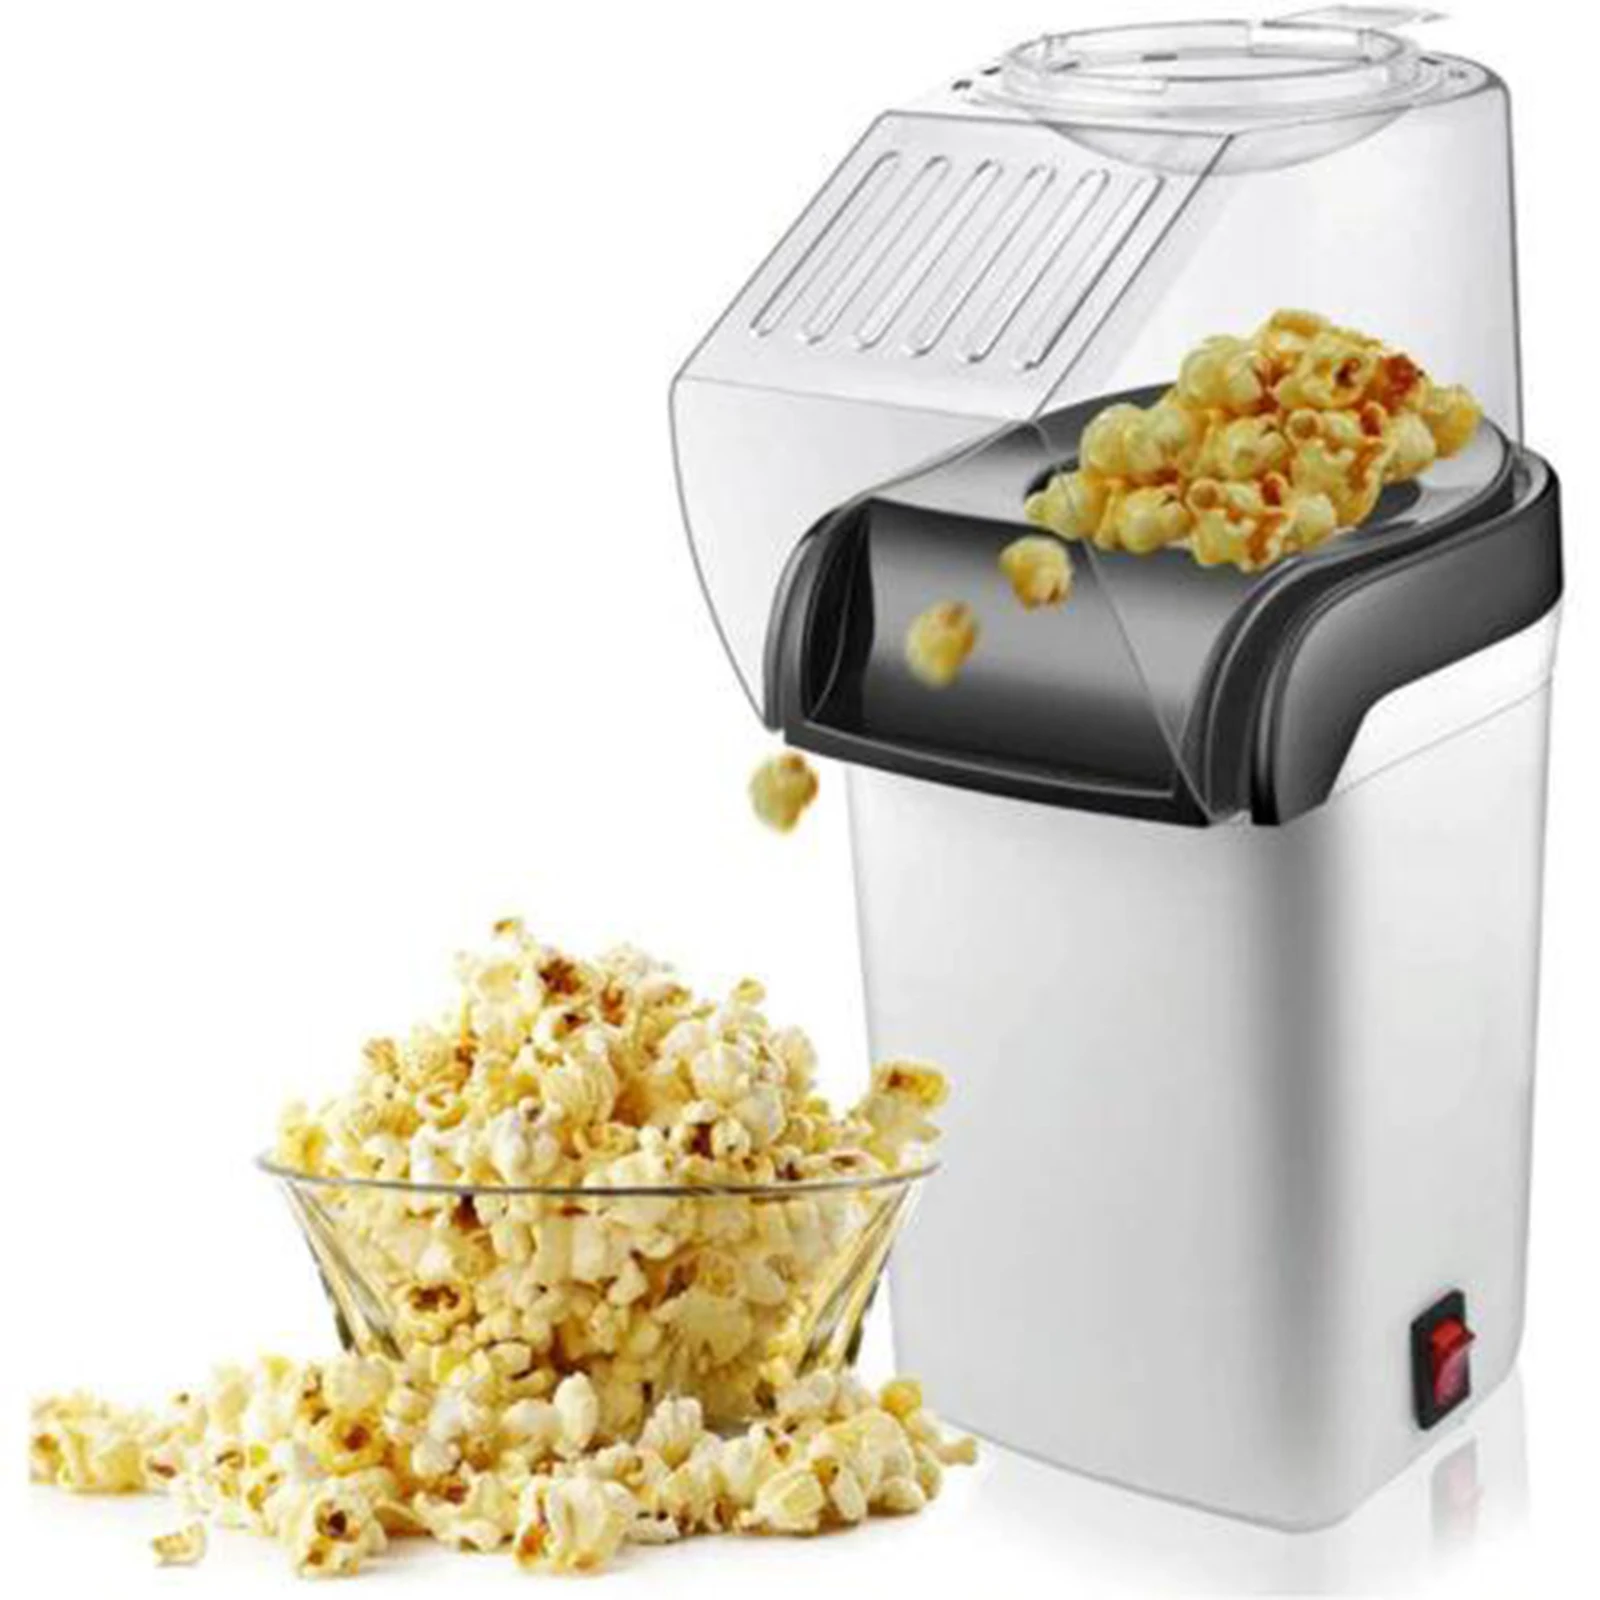 Hot Air Popcorn Machine Fast Popcorn Popper for Home Family Kitchen Gadgets